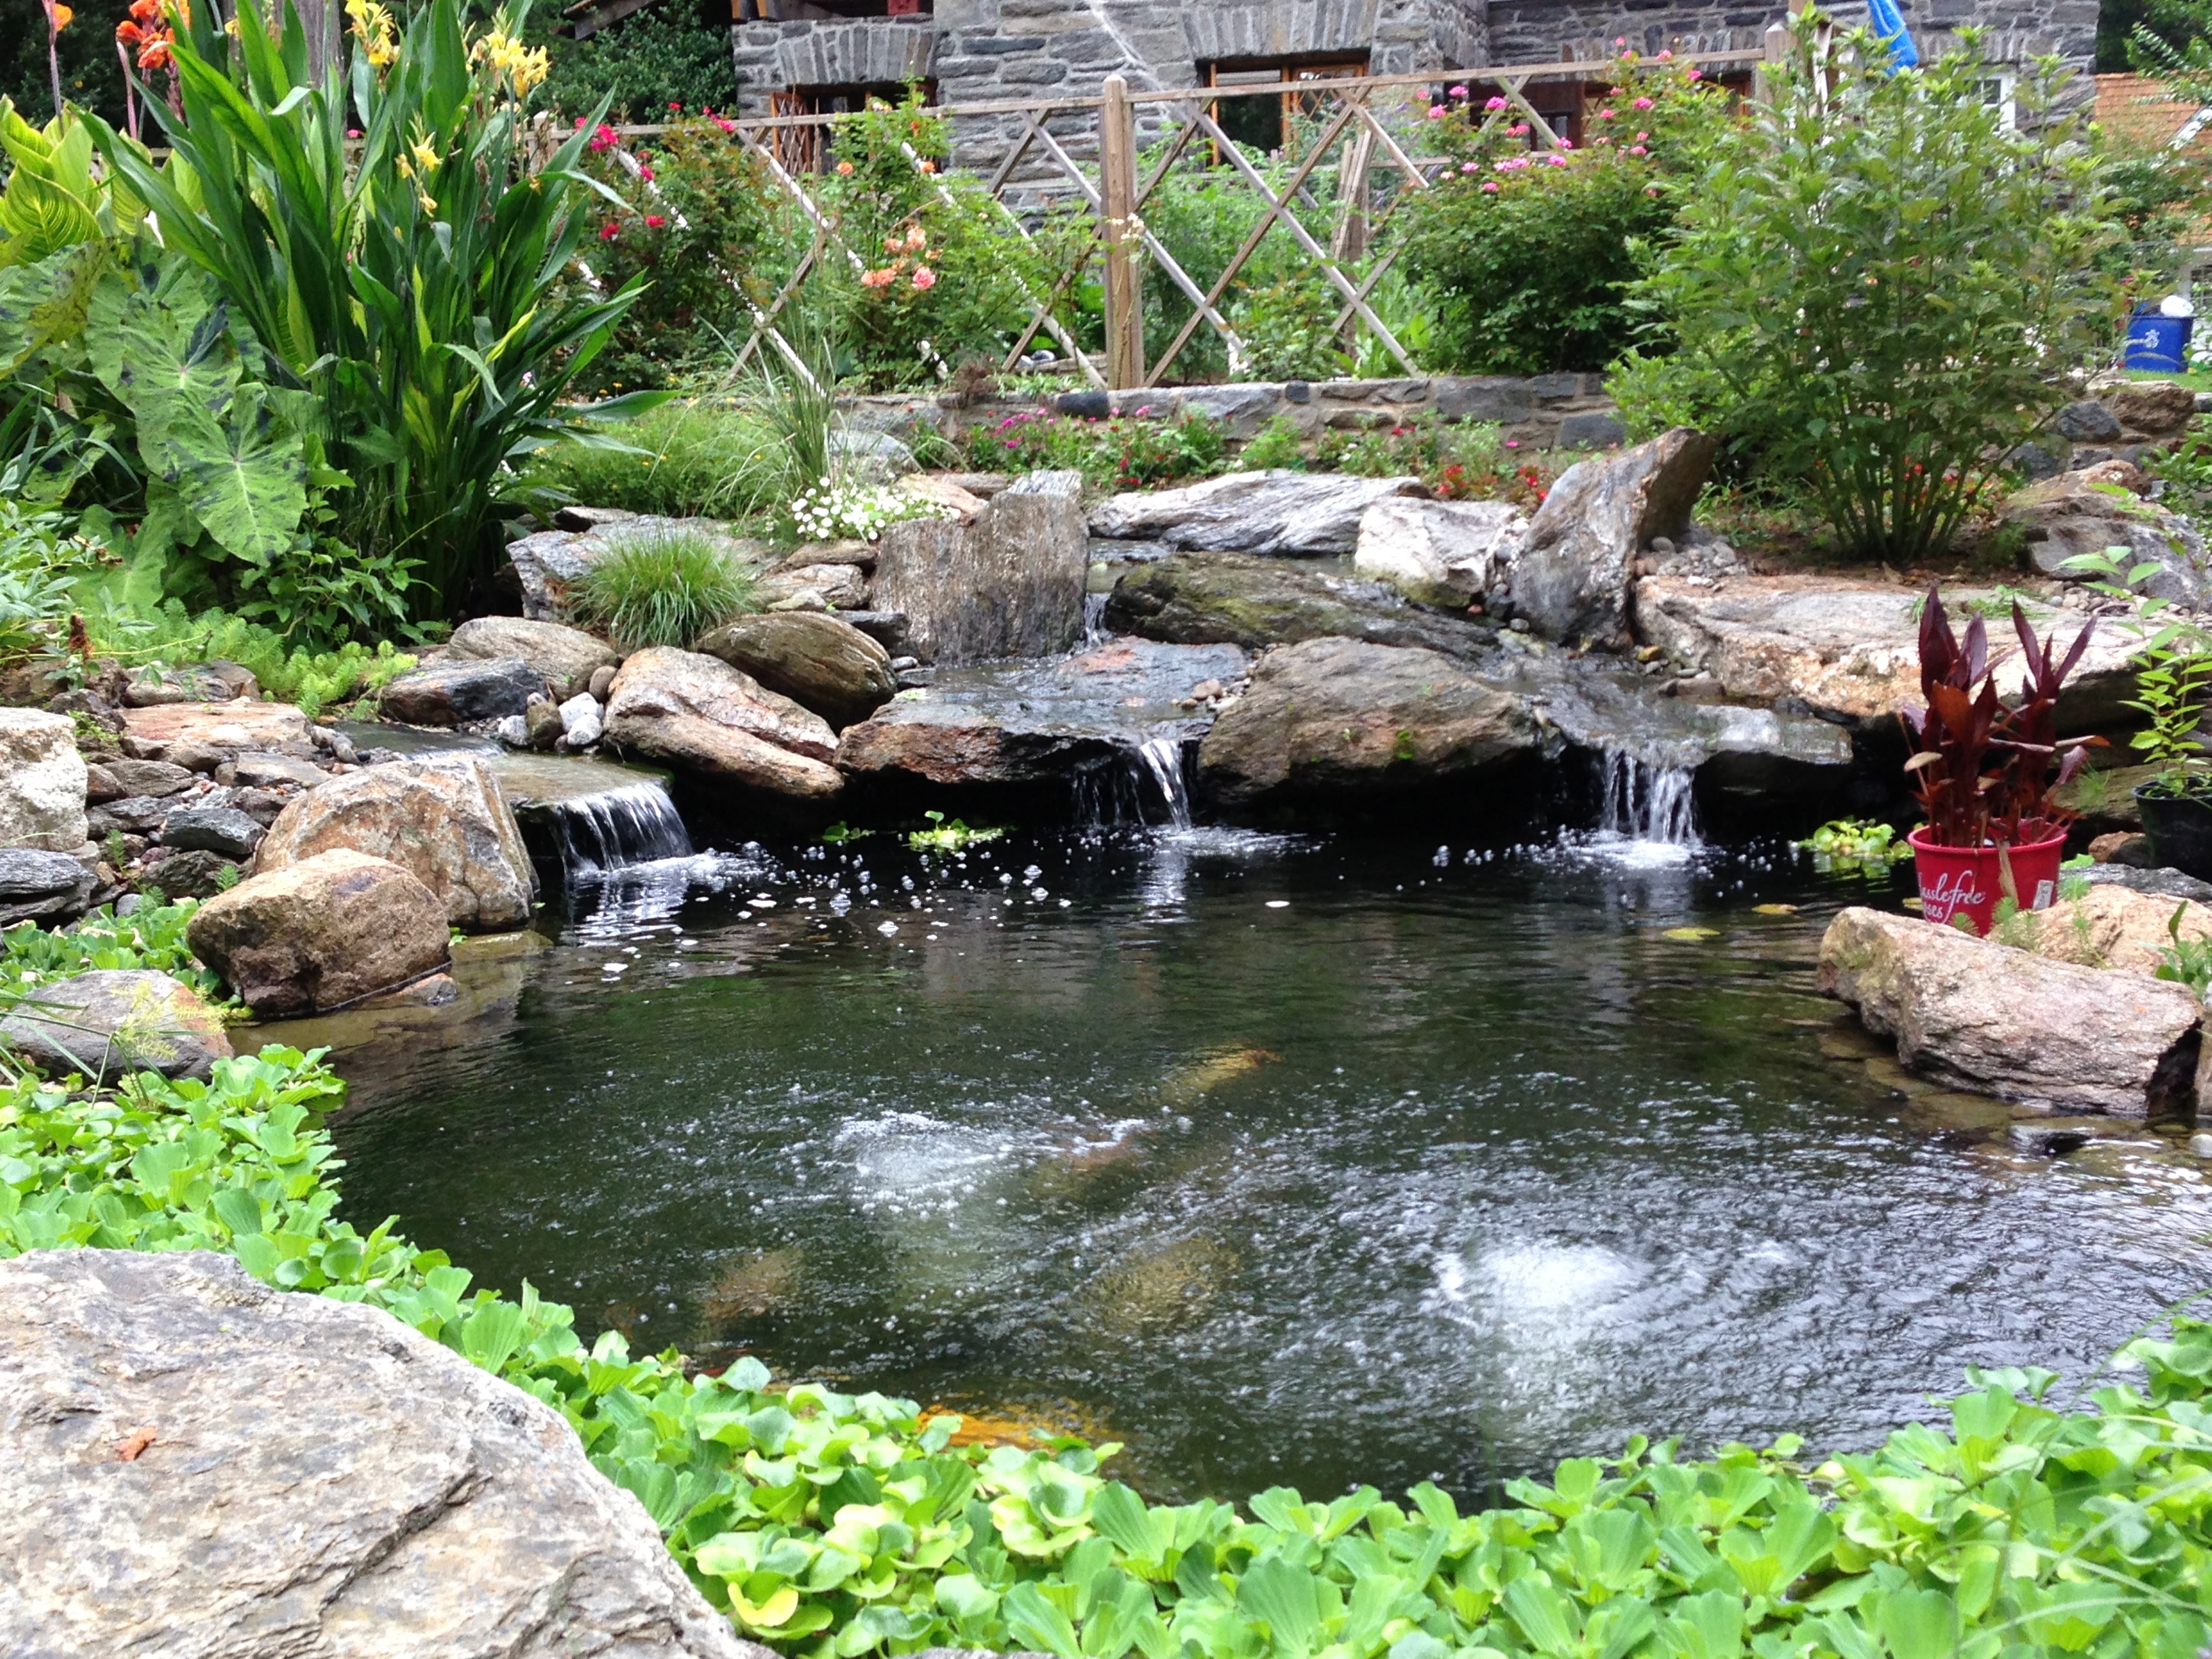 How to choose the best stone for your pond - AquaReale Pond Blog